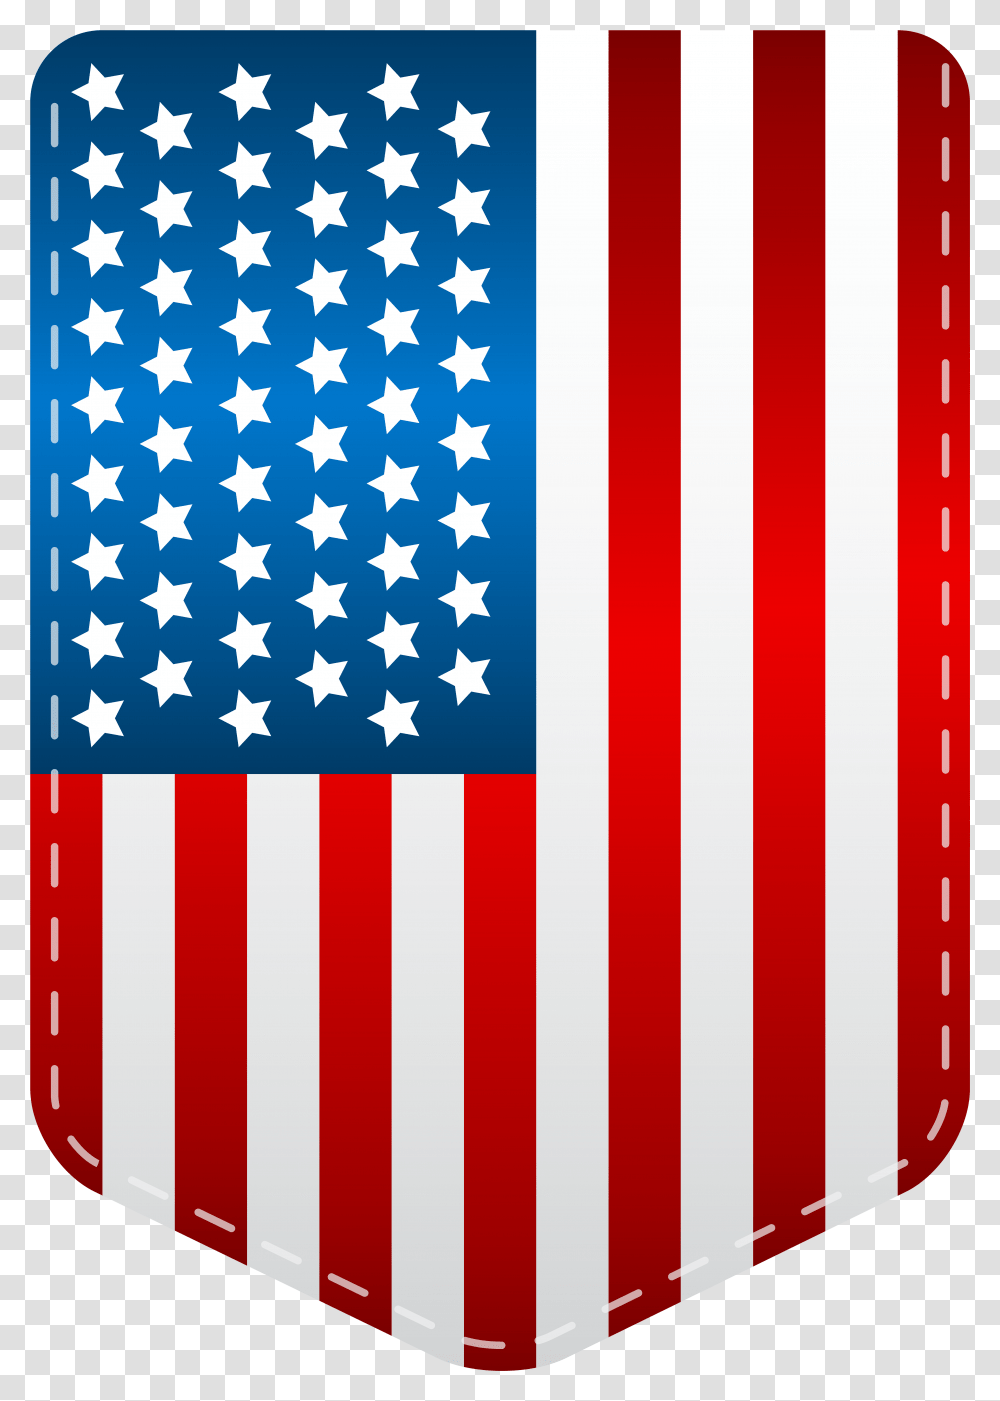 United States Captain America Eu Us Privacy Shield American Flag Shield Transparent Png